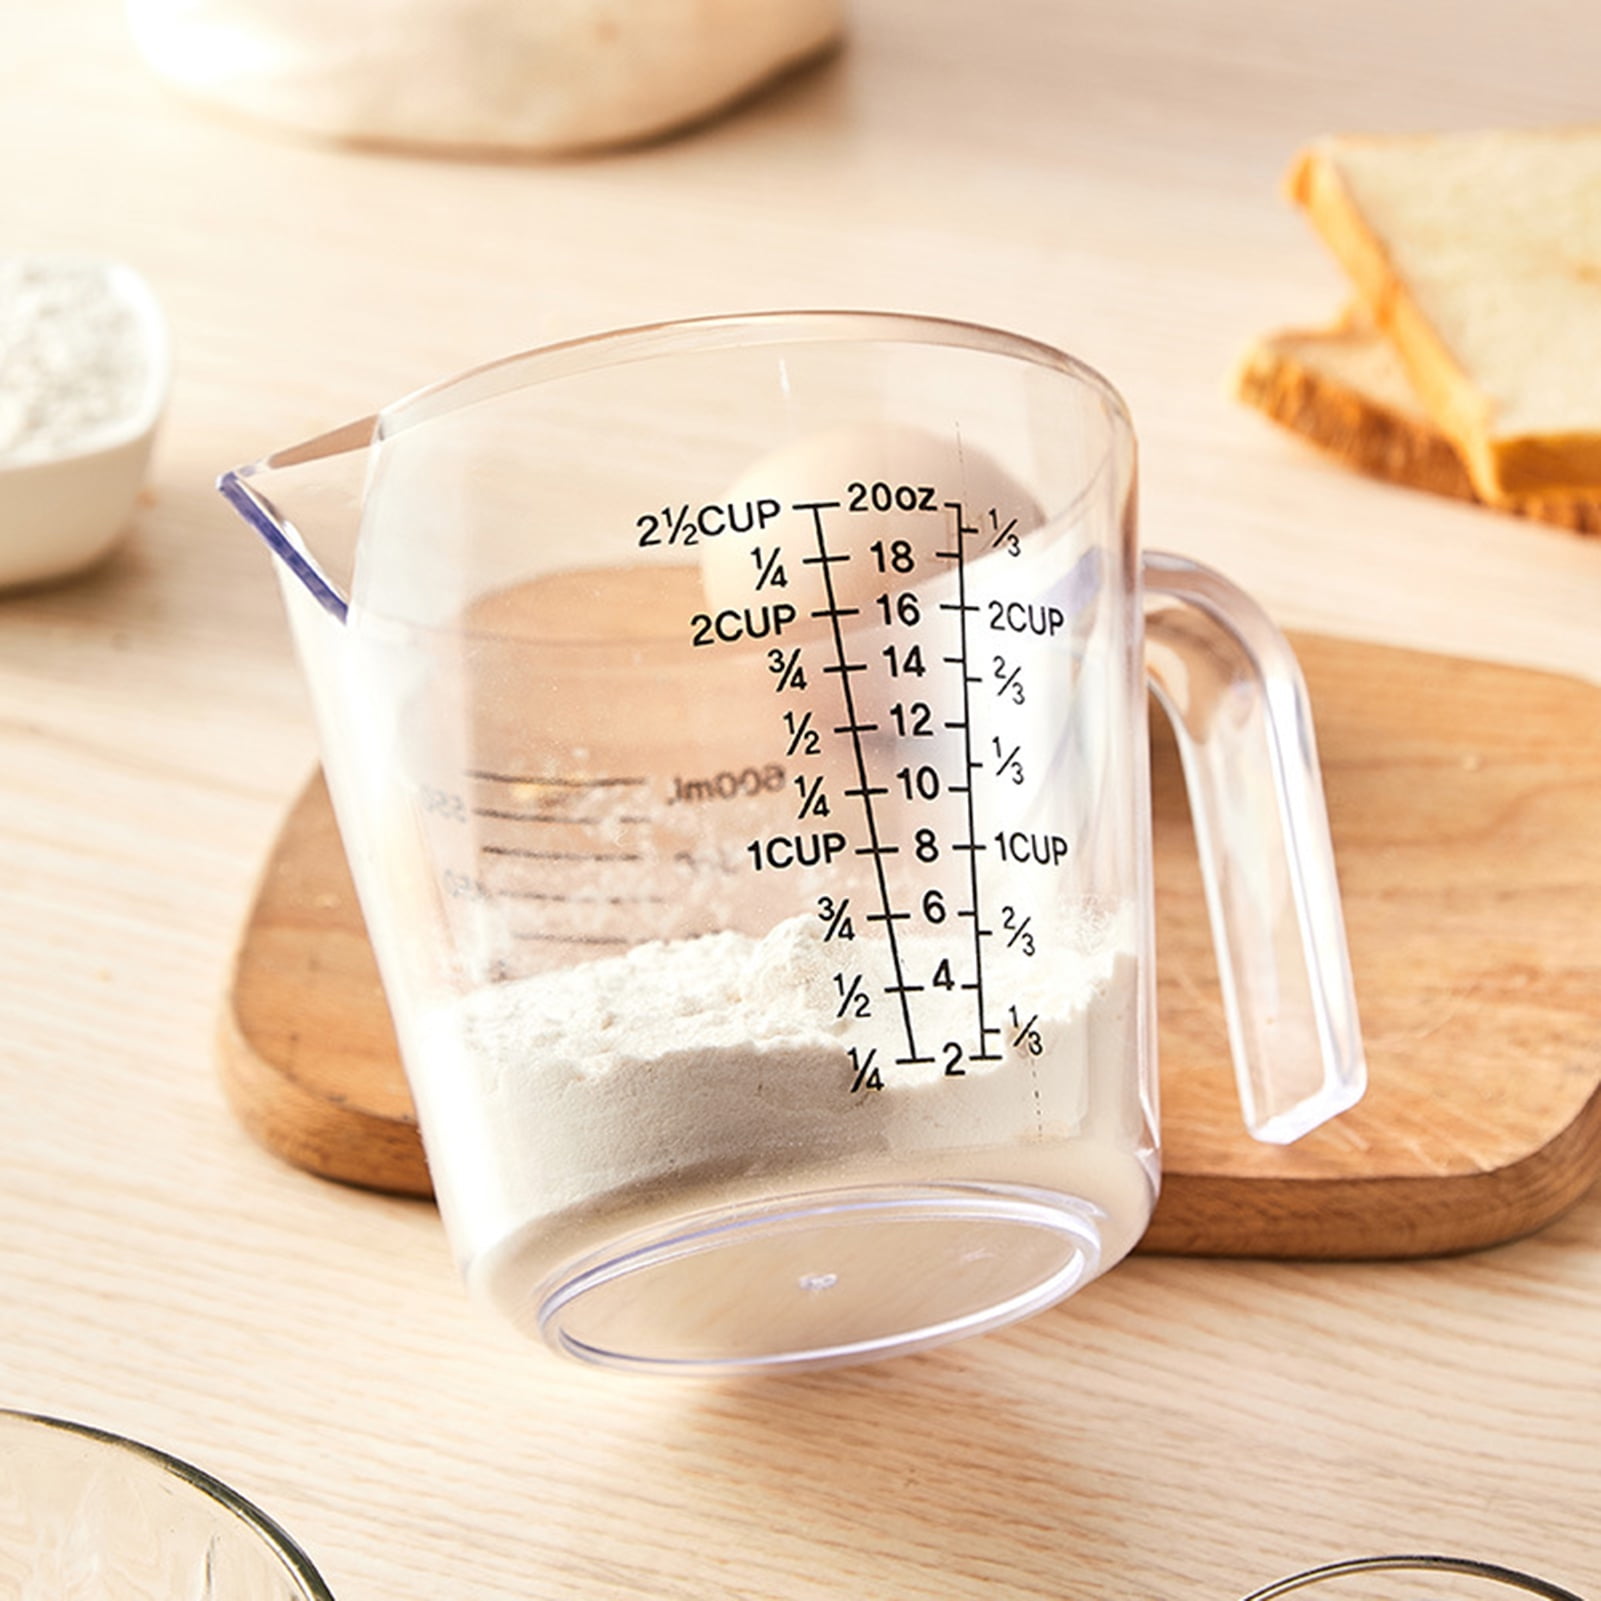 Gwong Clear Scale Measuring Cup with Handle Plastic Graduated Measuring  Mugs for Kitchen(Blue,150ML) 